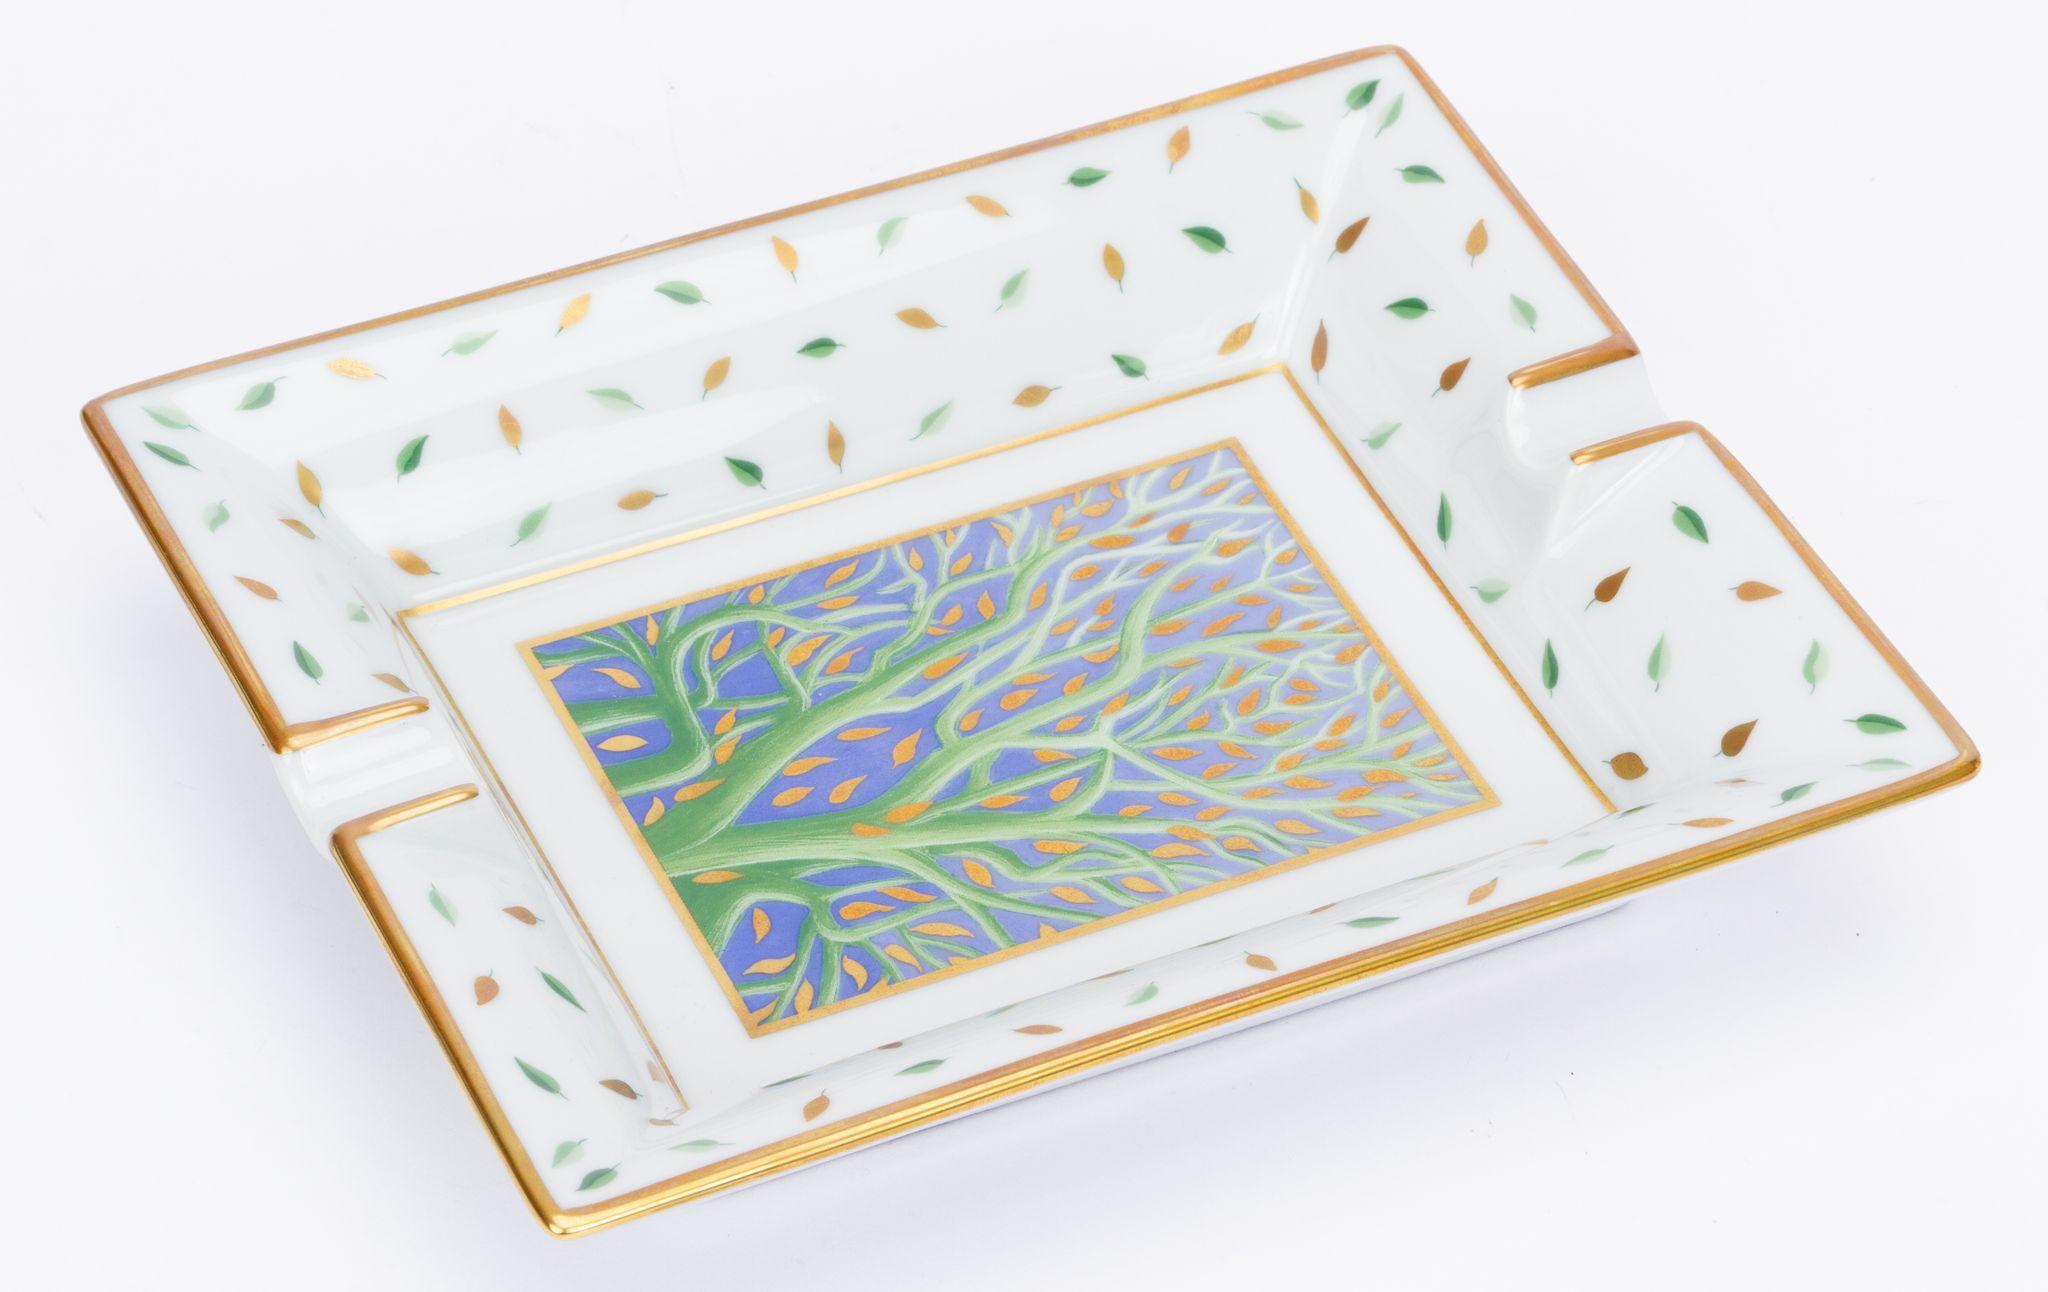 Hermès vintage ashtray in multicolor. The edges show multicolor leaves falling and in the center is branch of a tree with falling leaves. The piece is in excellent condition and comes with the original box.